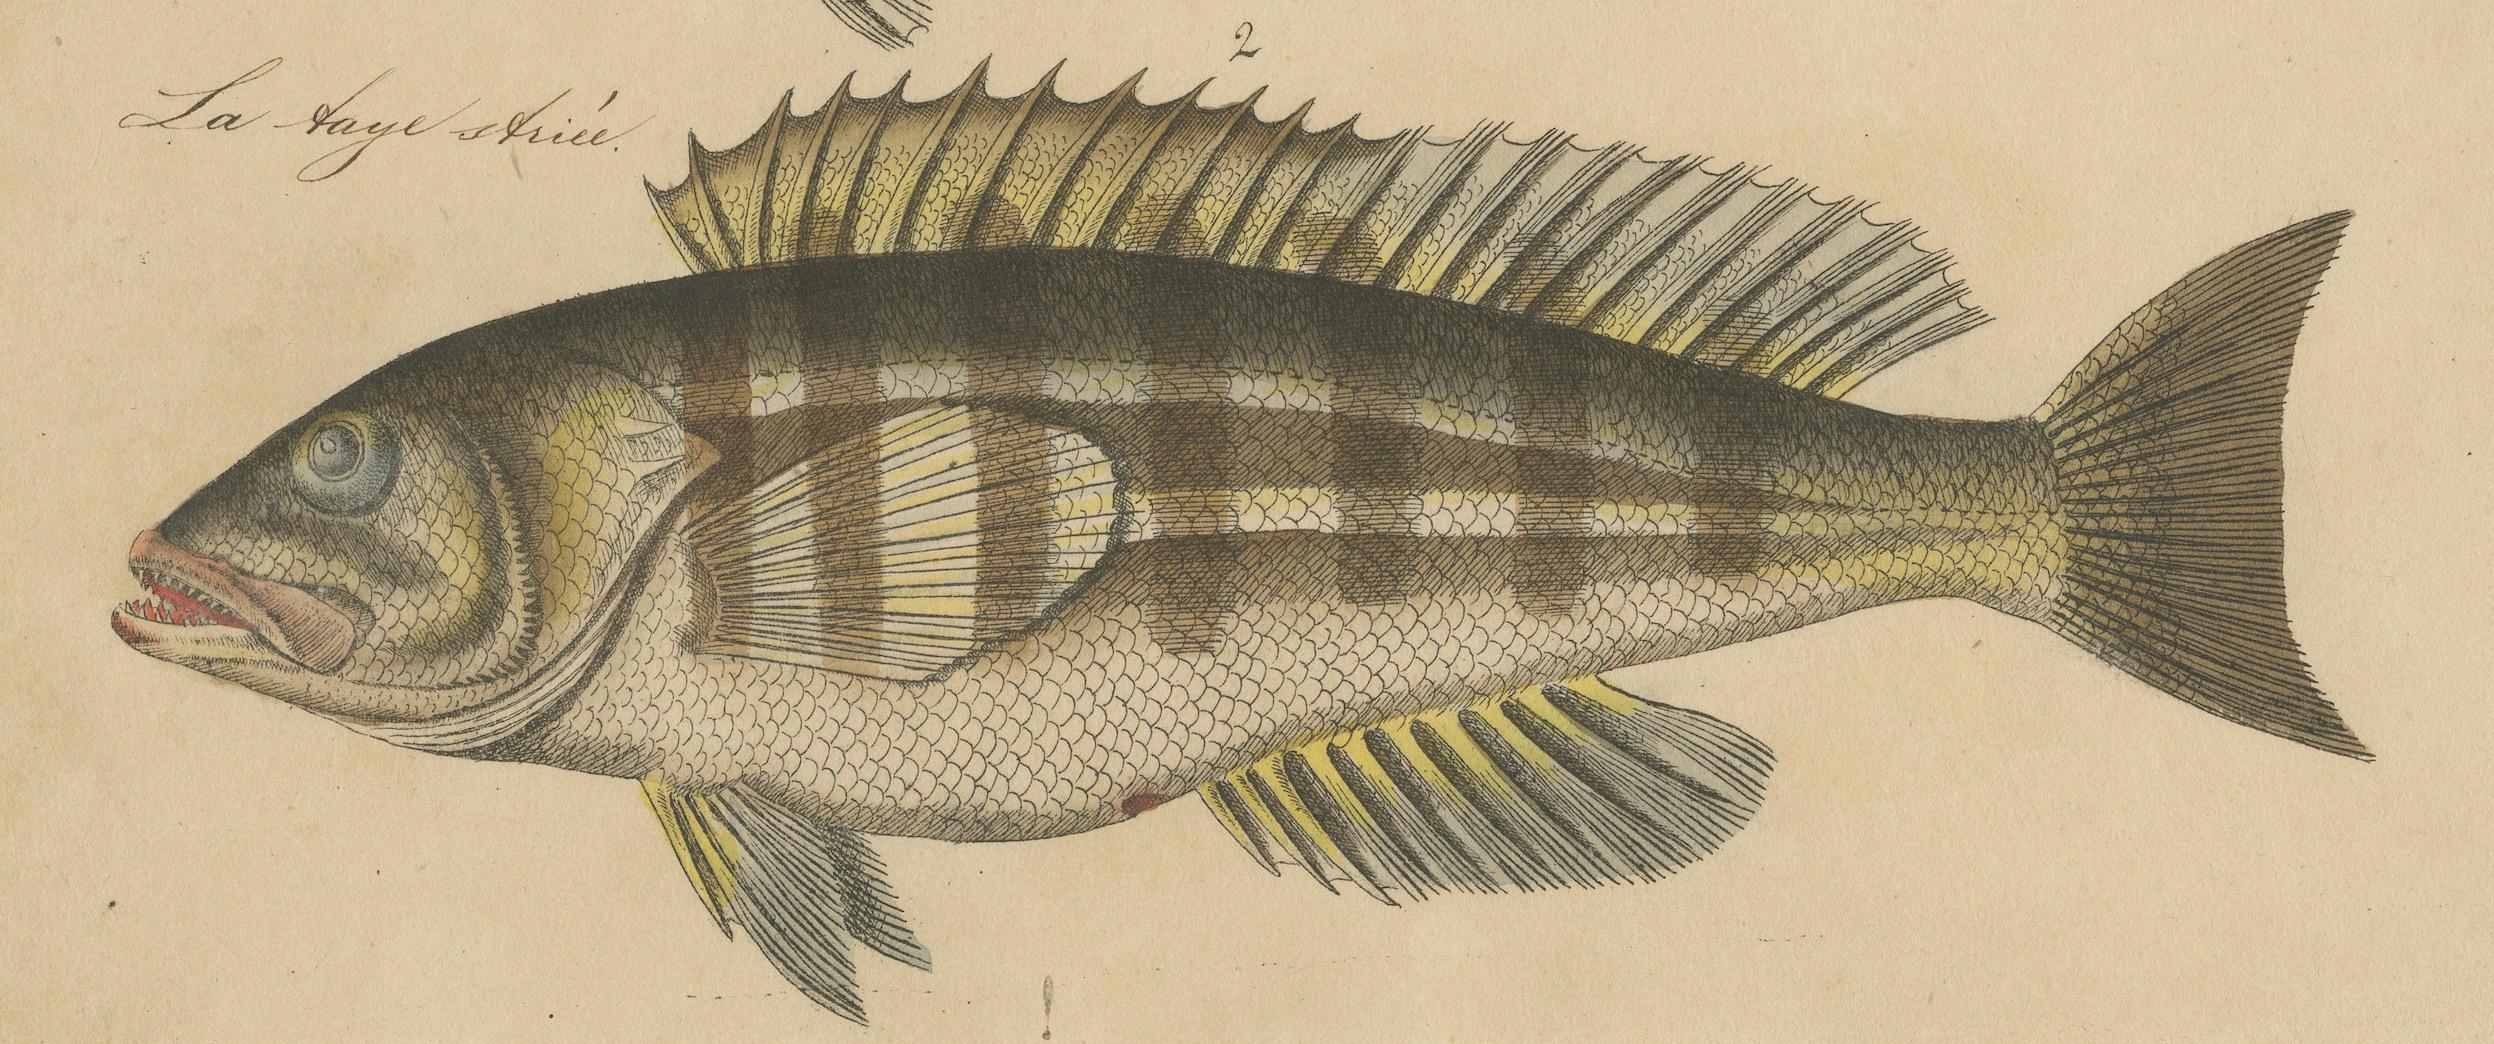 1819 Marine Splendor: Original Hand-Colored Engravings of Fishes For Sale 2